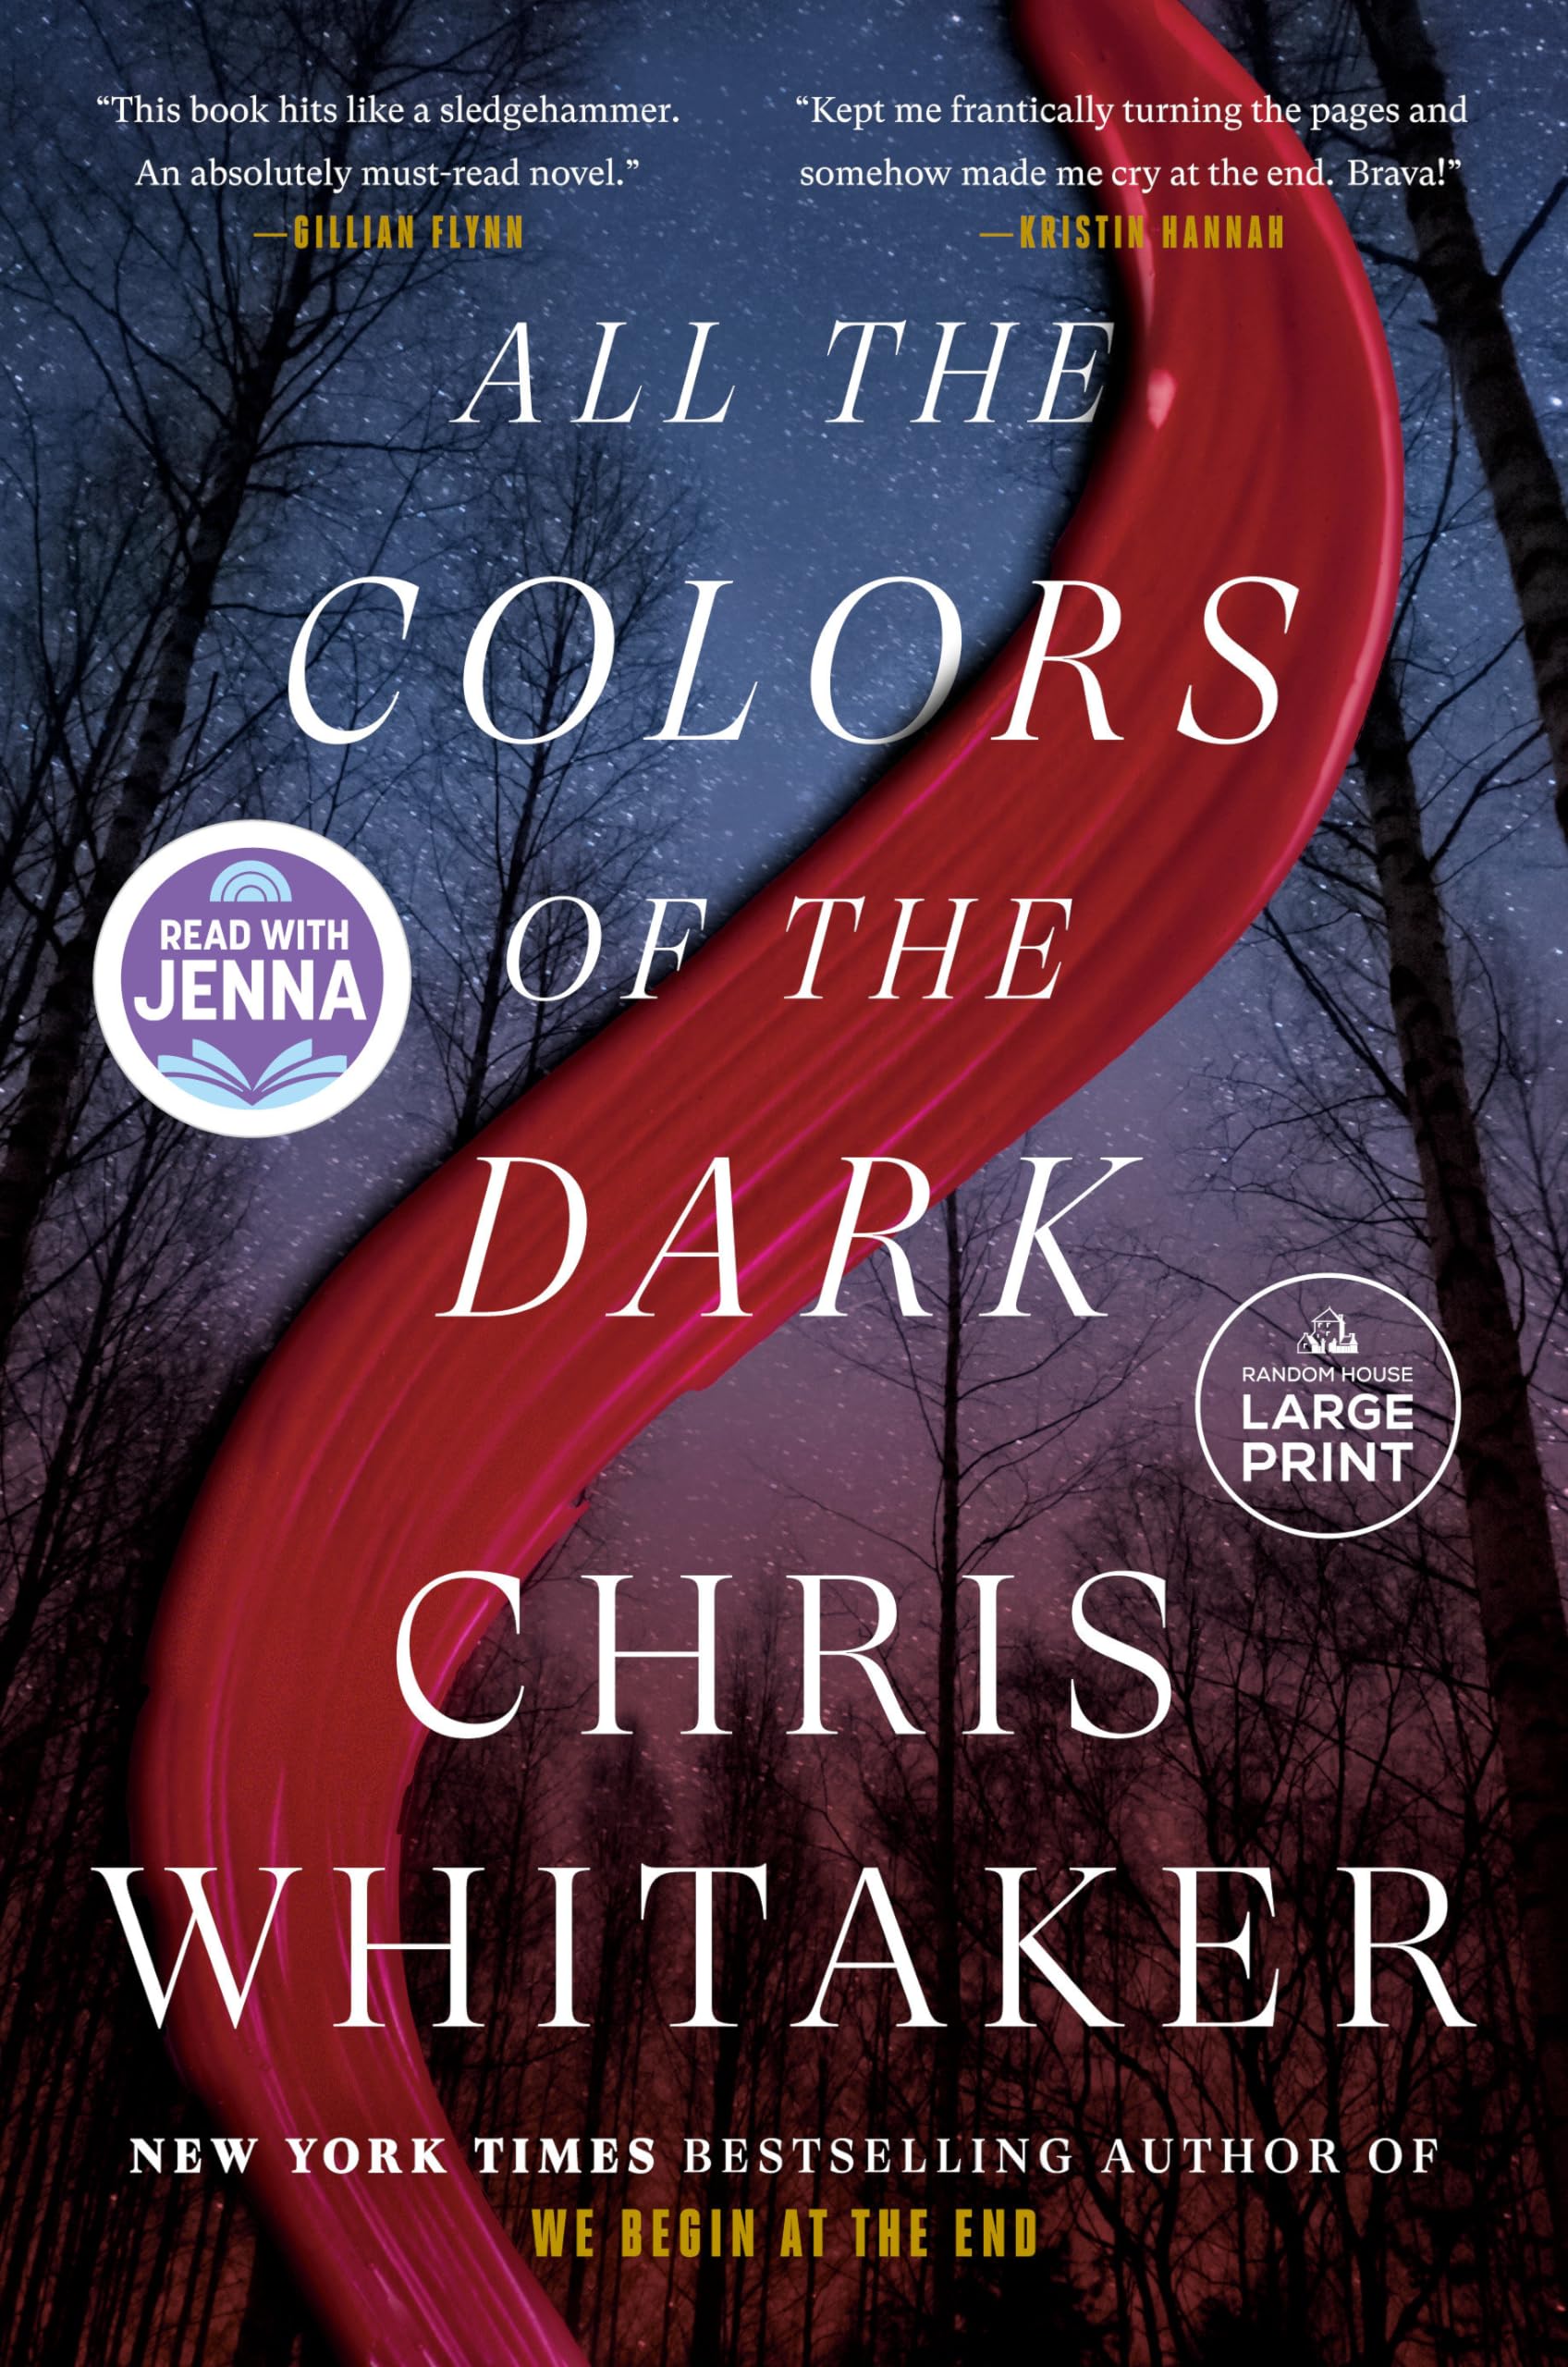 All the Colors of the Dark by Whitaker, Chris